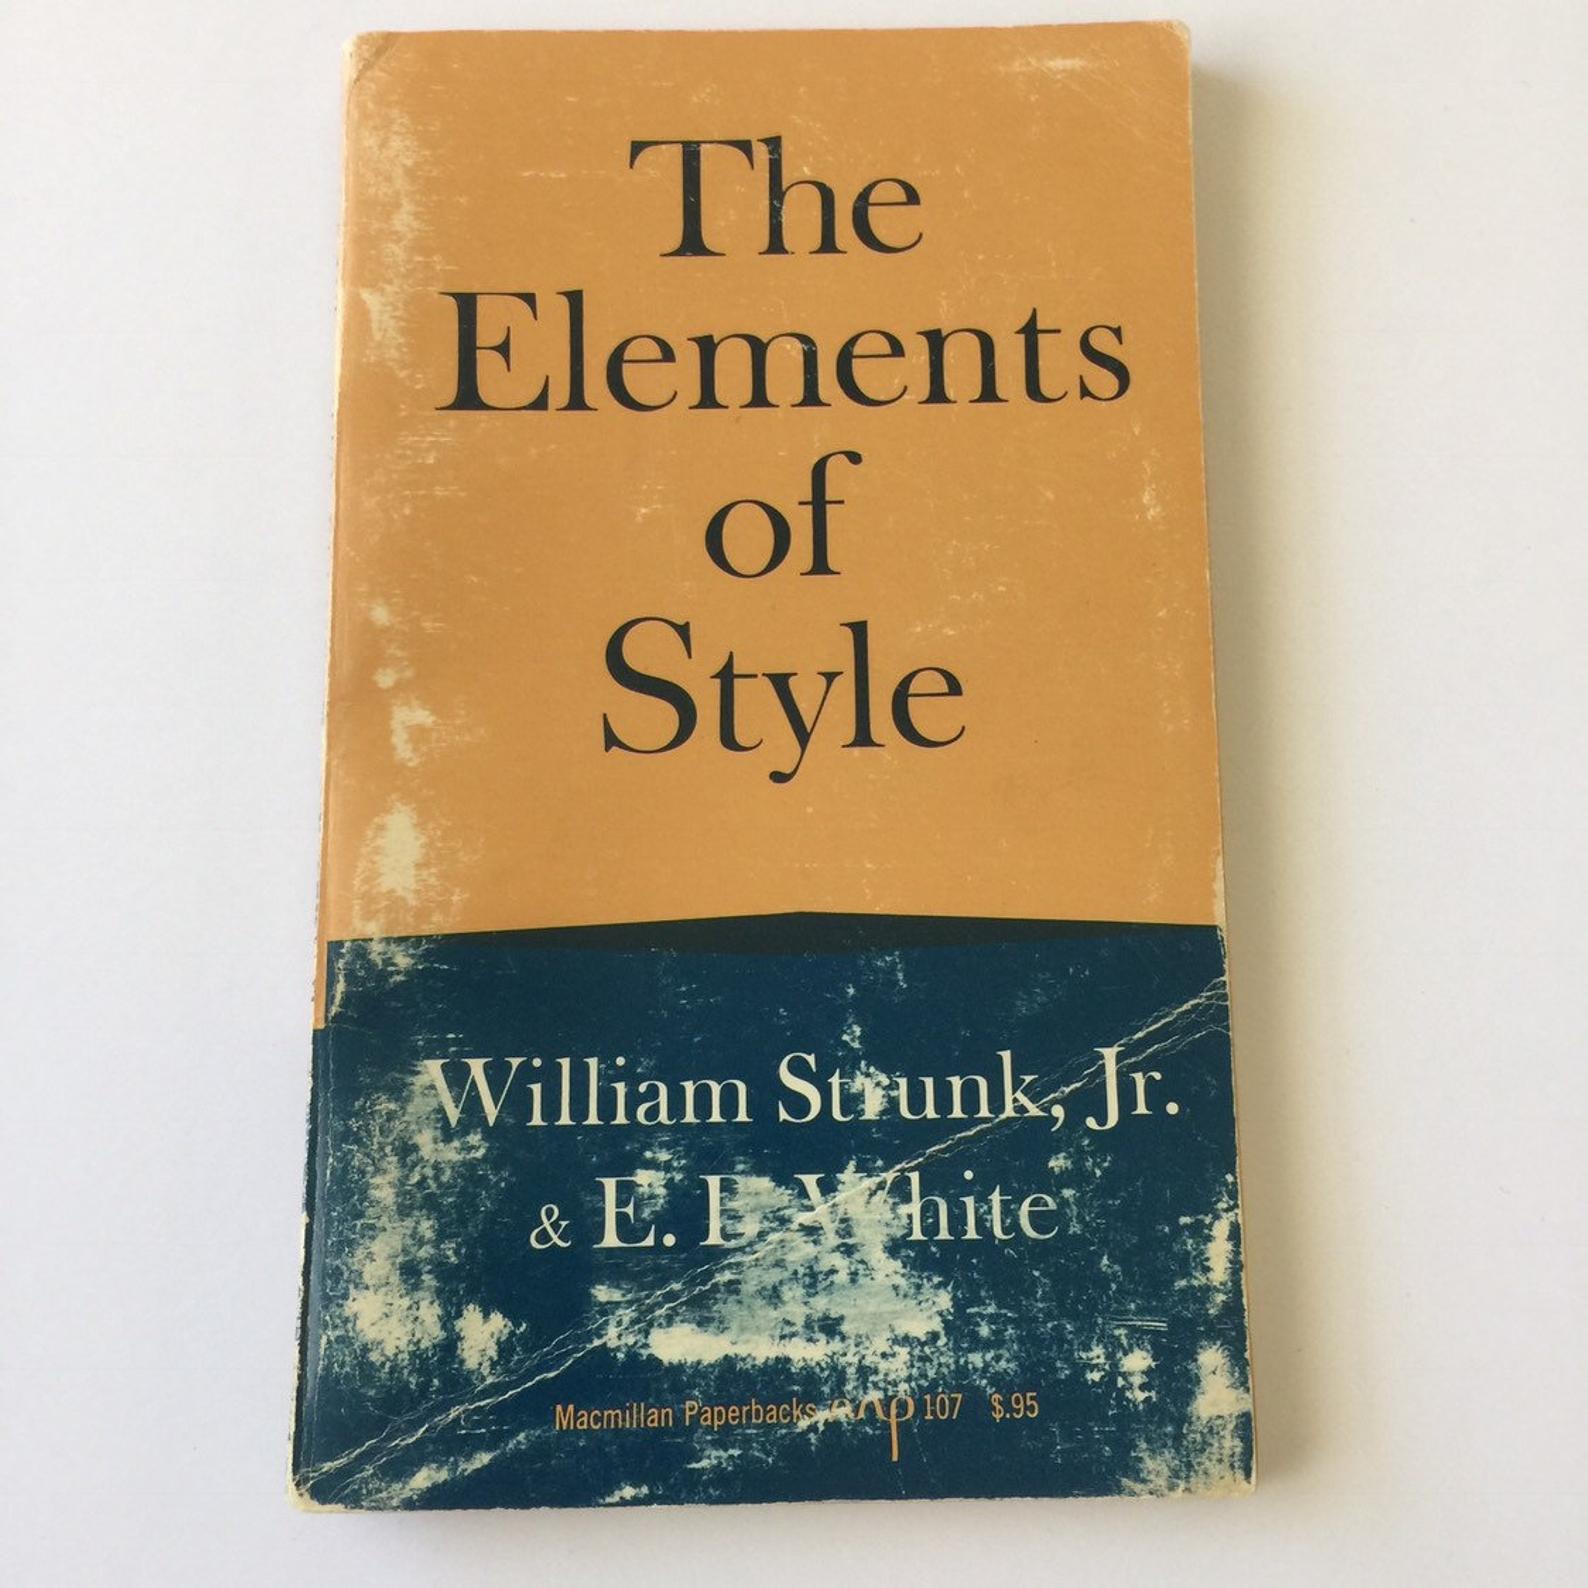 Writers and journalists have Elements of Style